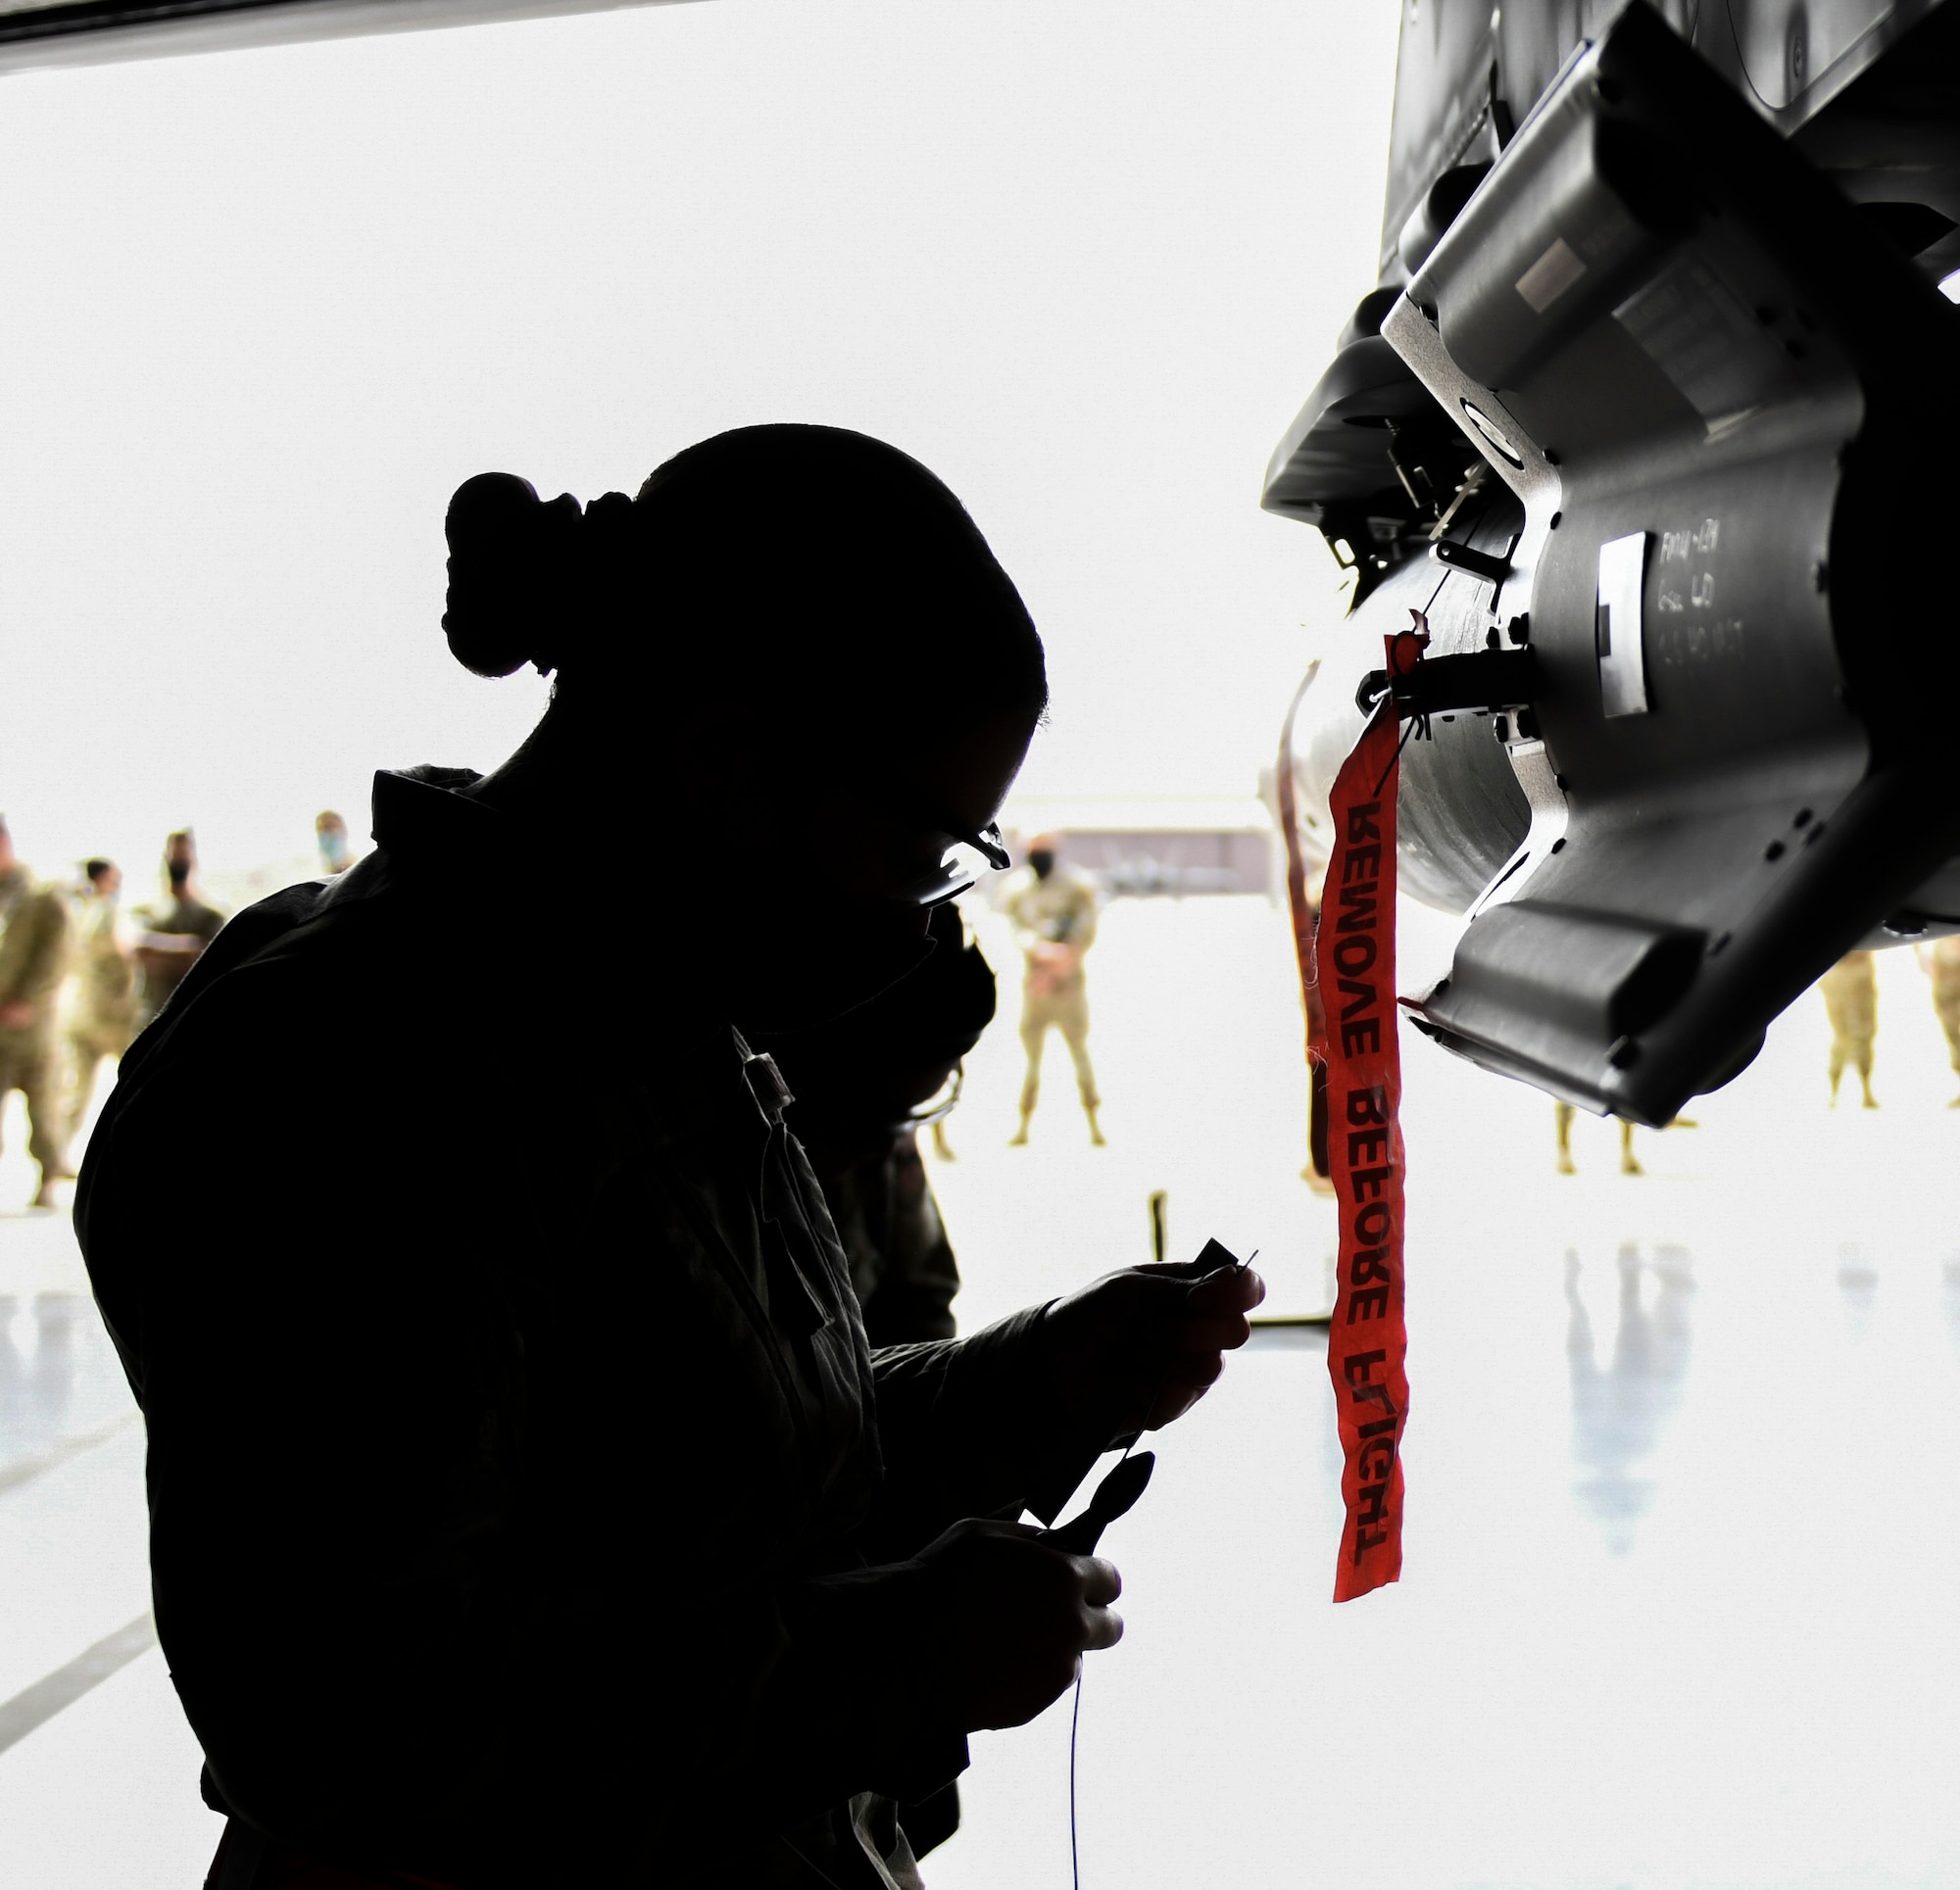 Airman 1st Class Melanie Morgan, 63rd Aircraft Maintenance Unit weapons load technician, prepares to install the guidance section of a GBU-12 Paveway II laser-guided bomb March 25, 2021, at Luke Air Force Base, Arizona. Morgan was part of a three-person team made of female Airmen from different units during the Women of Weapons Exhibition Load, which highlighted the capabilities of women in the weapons load careerfield. Diversity allows the Air Force to capitalize on all available talent by enabling a culture of inclusion. (U.S. Air Force photo by Staff Sgt. Amber Carter)